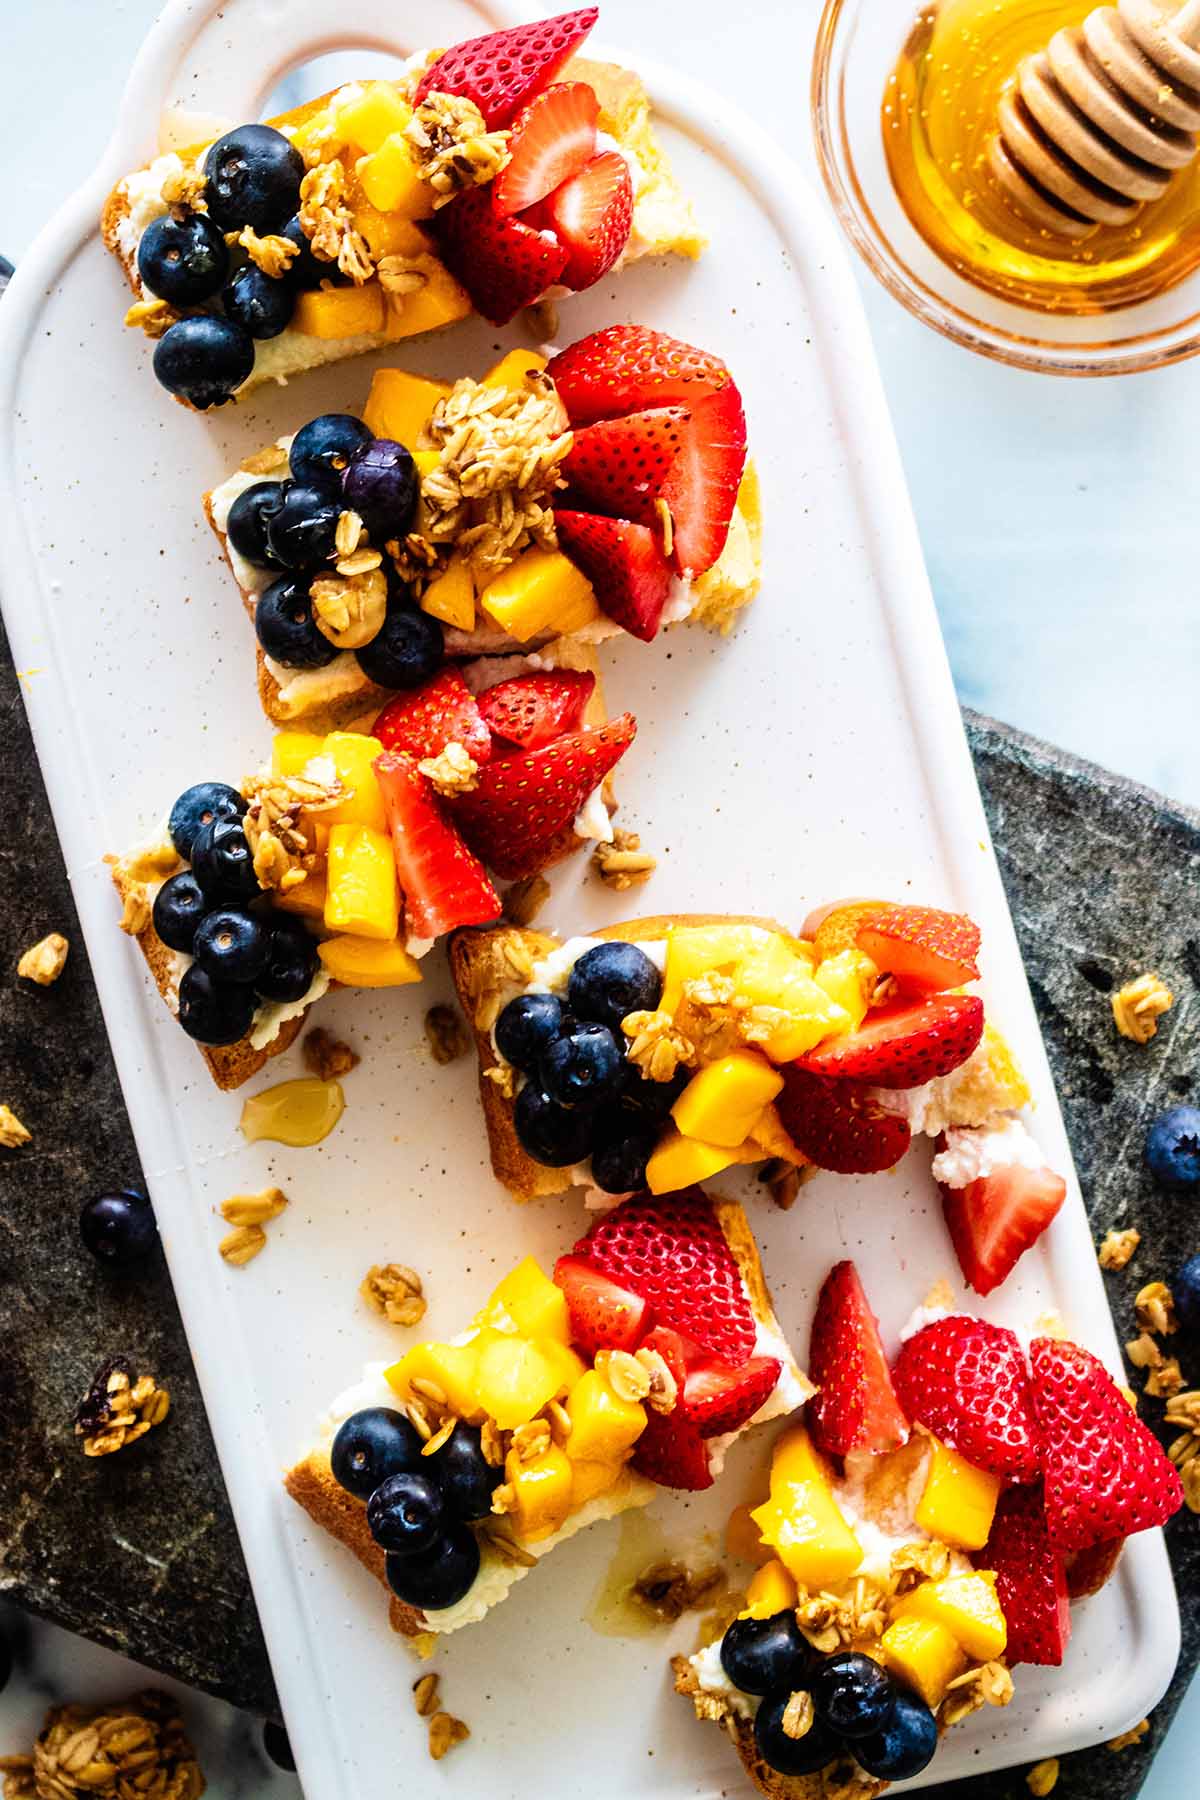 Slices of fruit-topped ricotta toast on a white ceramic serving board with a small bowl of honey and honey wand.